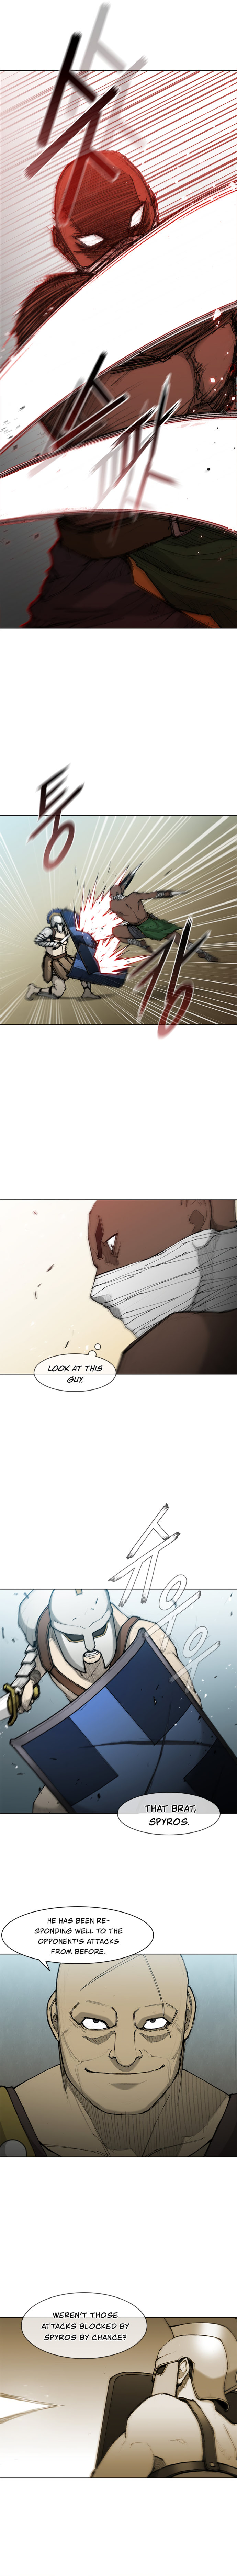 Long Way of the Warrior - Chapter 40 Page 5